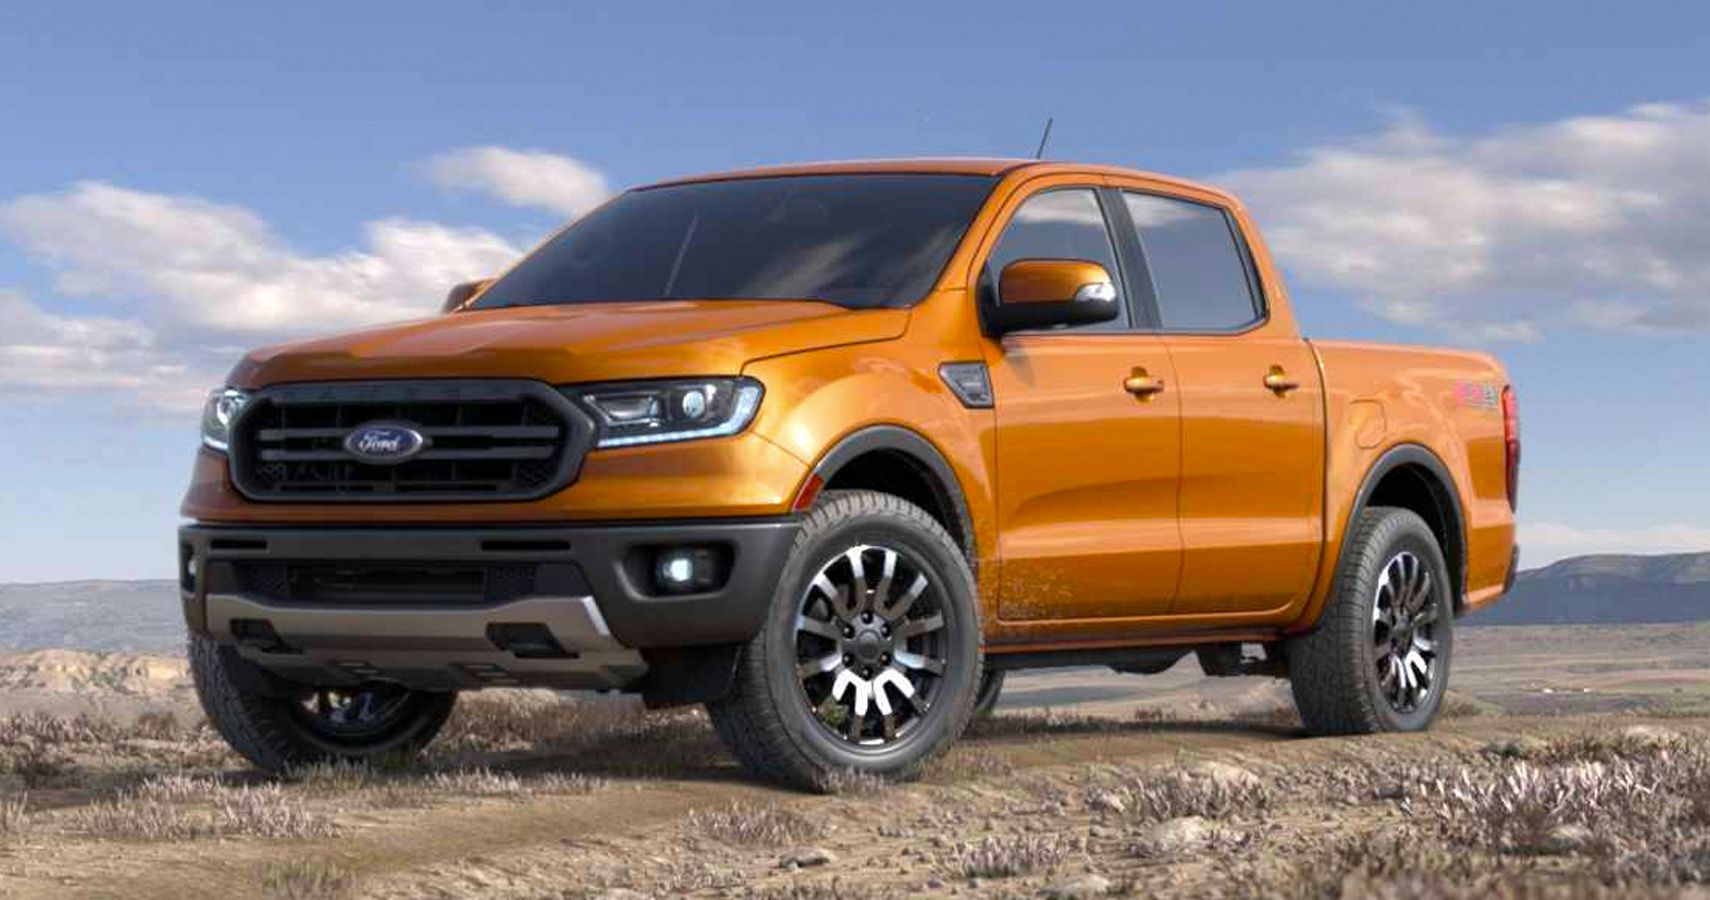 2019 Ford Ranger Begins Production In Michigan HotCars